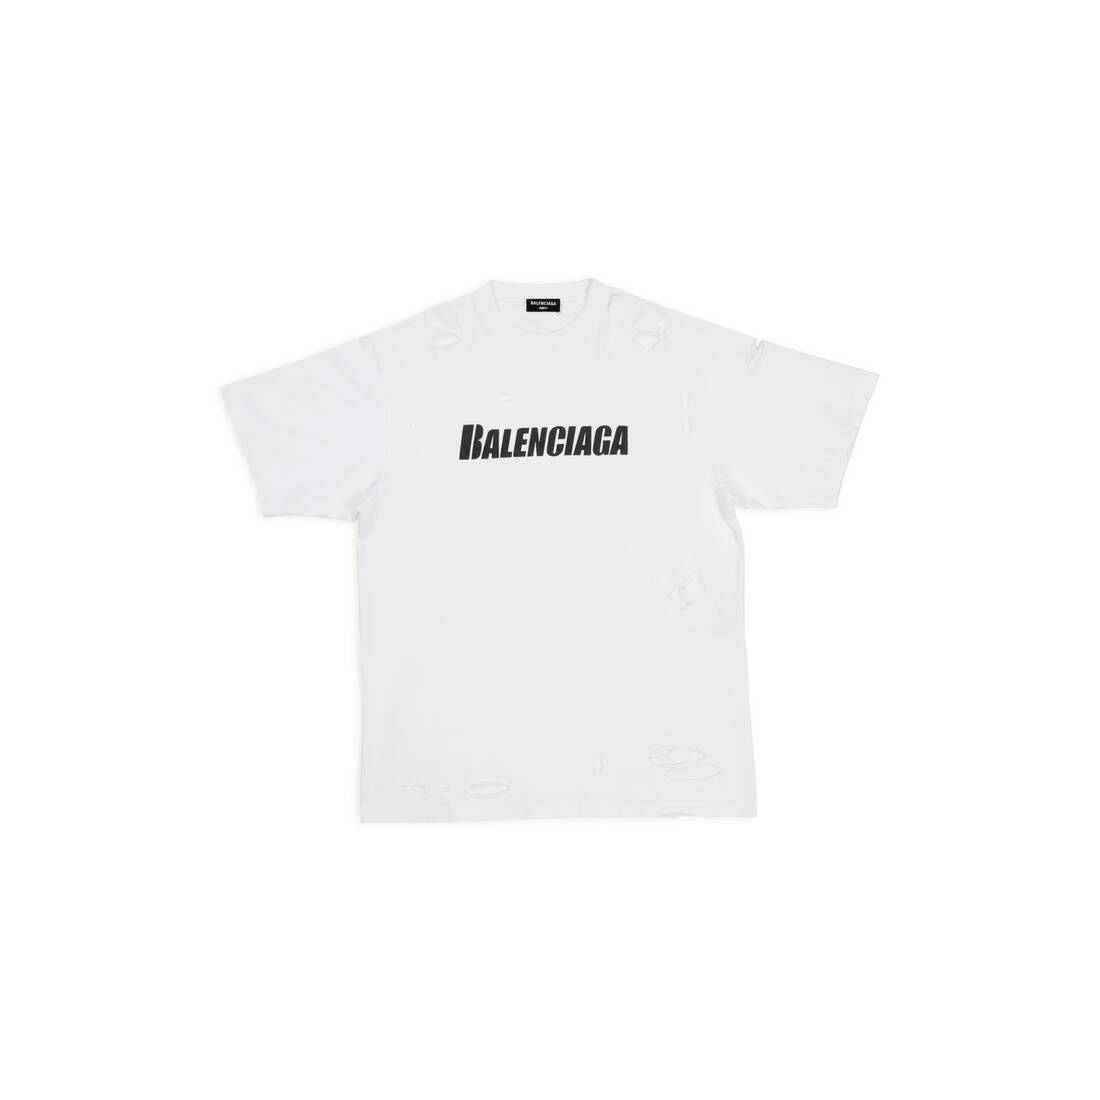 Destroyed T-shirt Boxy Fit in White